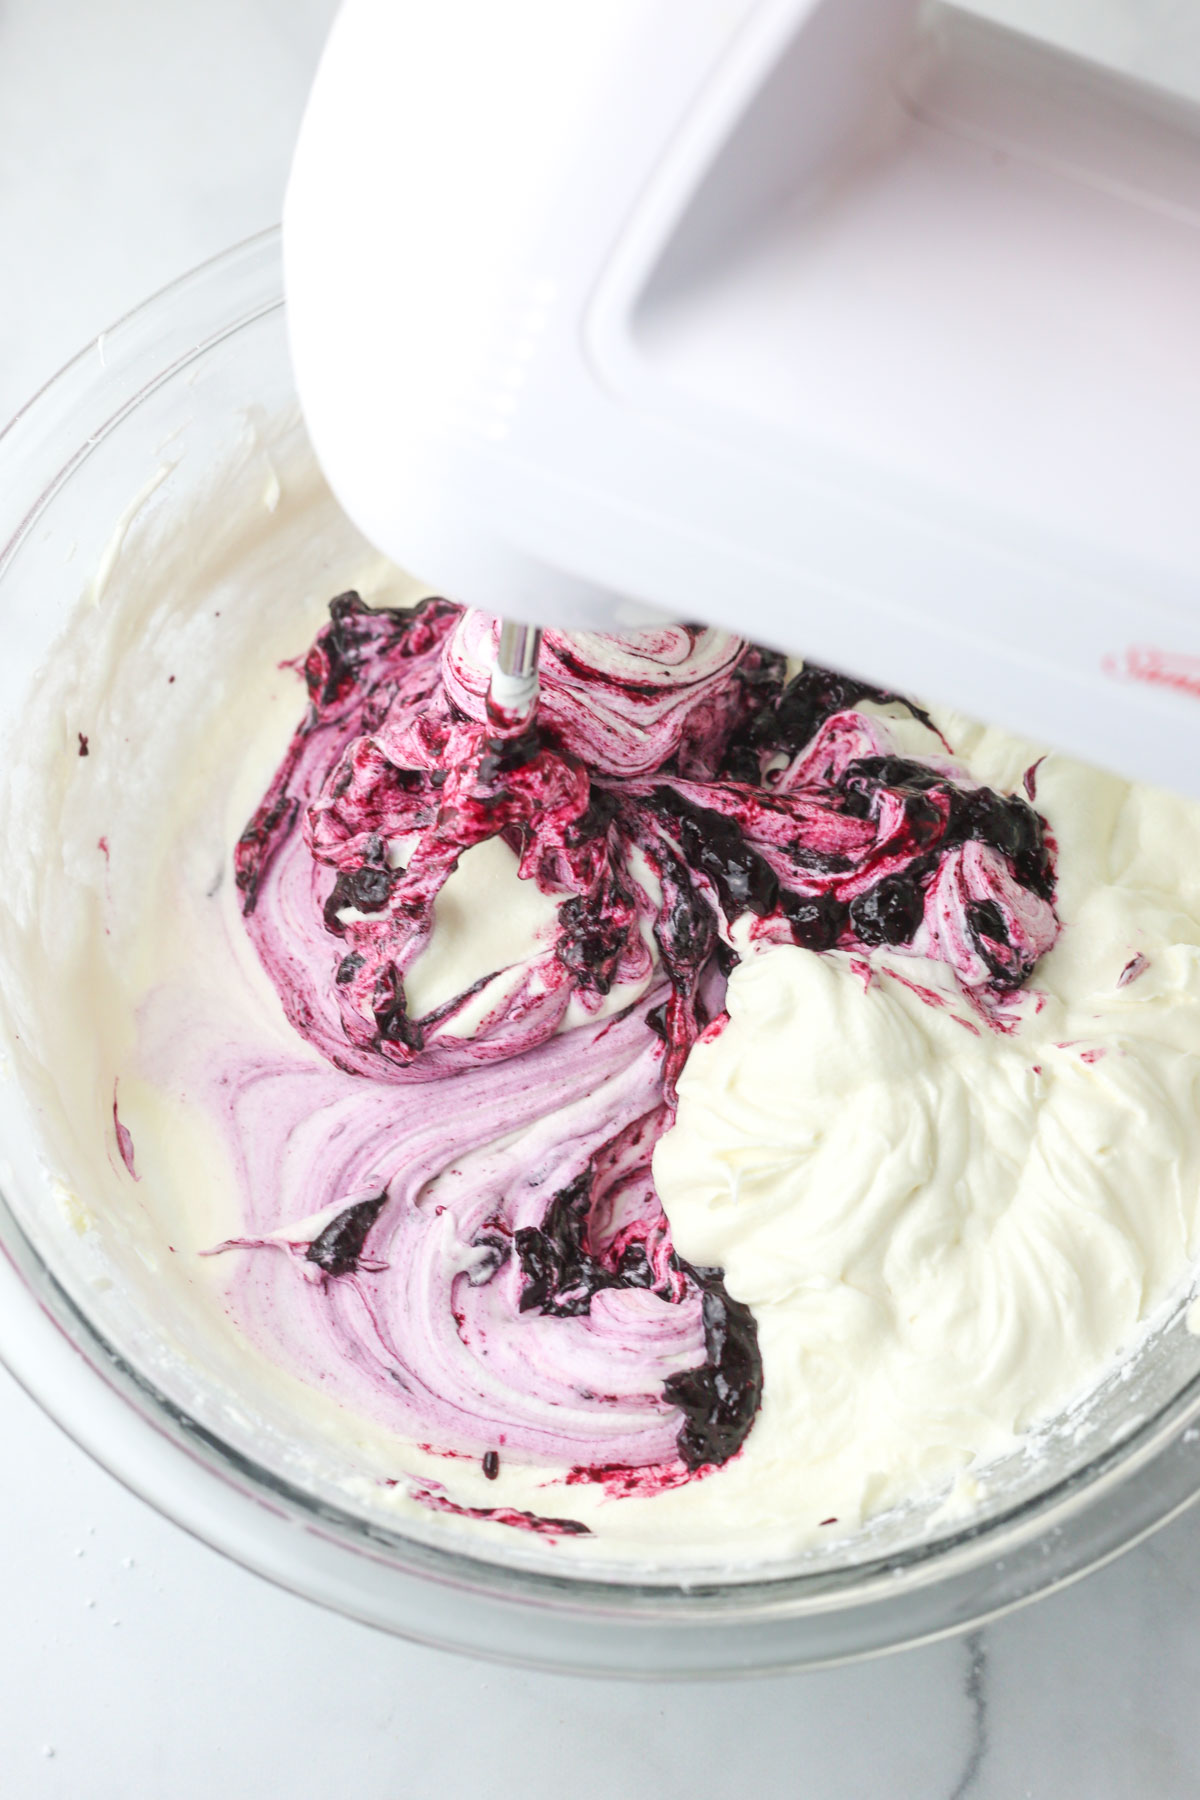 Mixing the blueberry sauce into the cream cheese frosting.